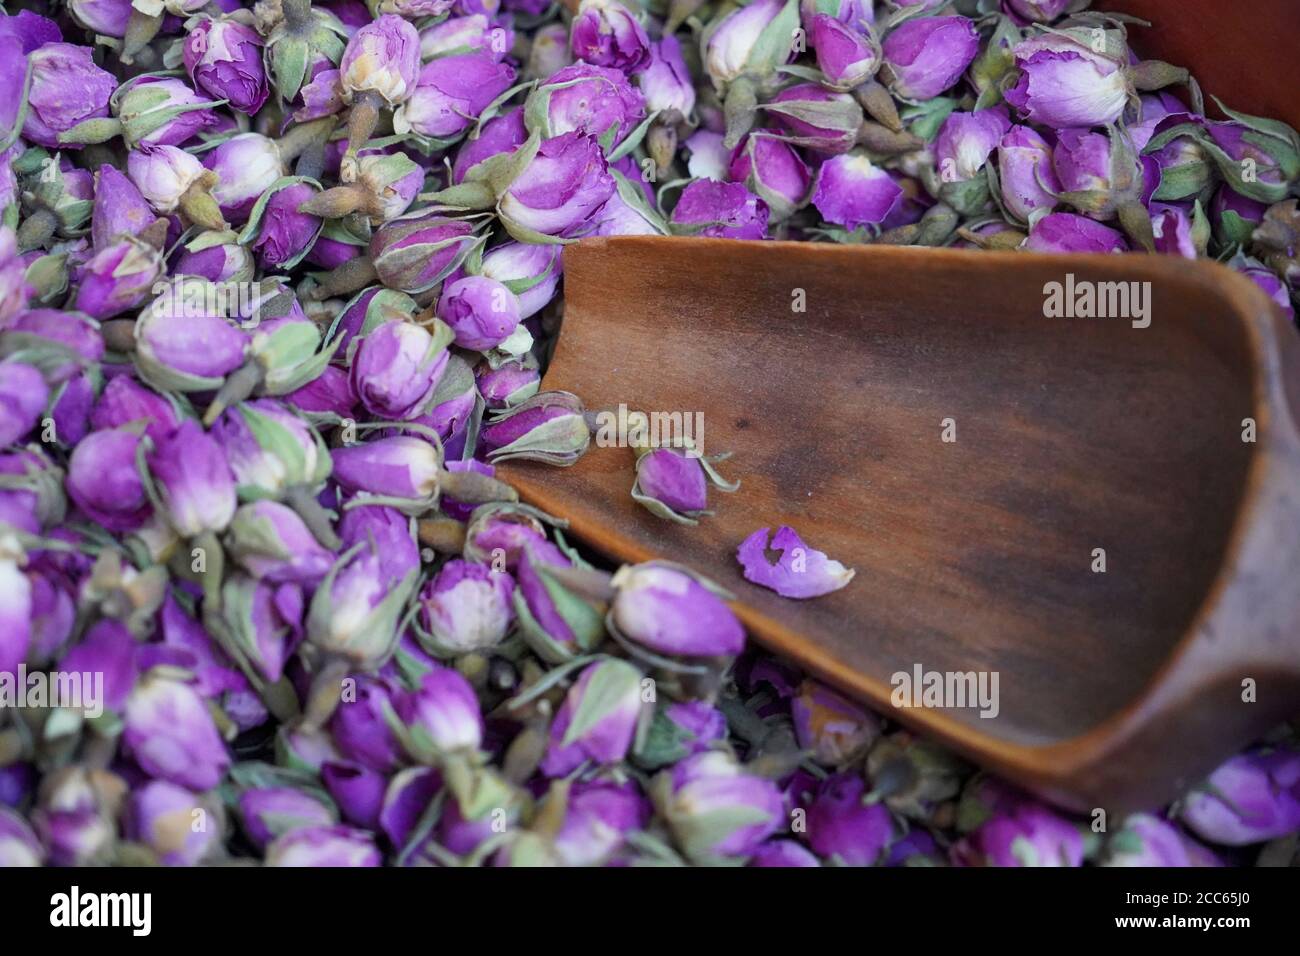 Rose buds used for teas, food flavouring and perfumes Stock Photo